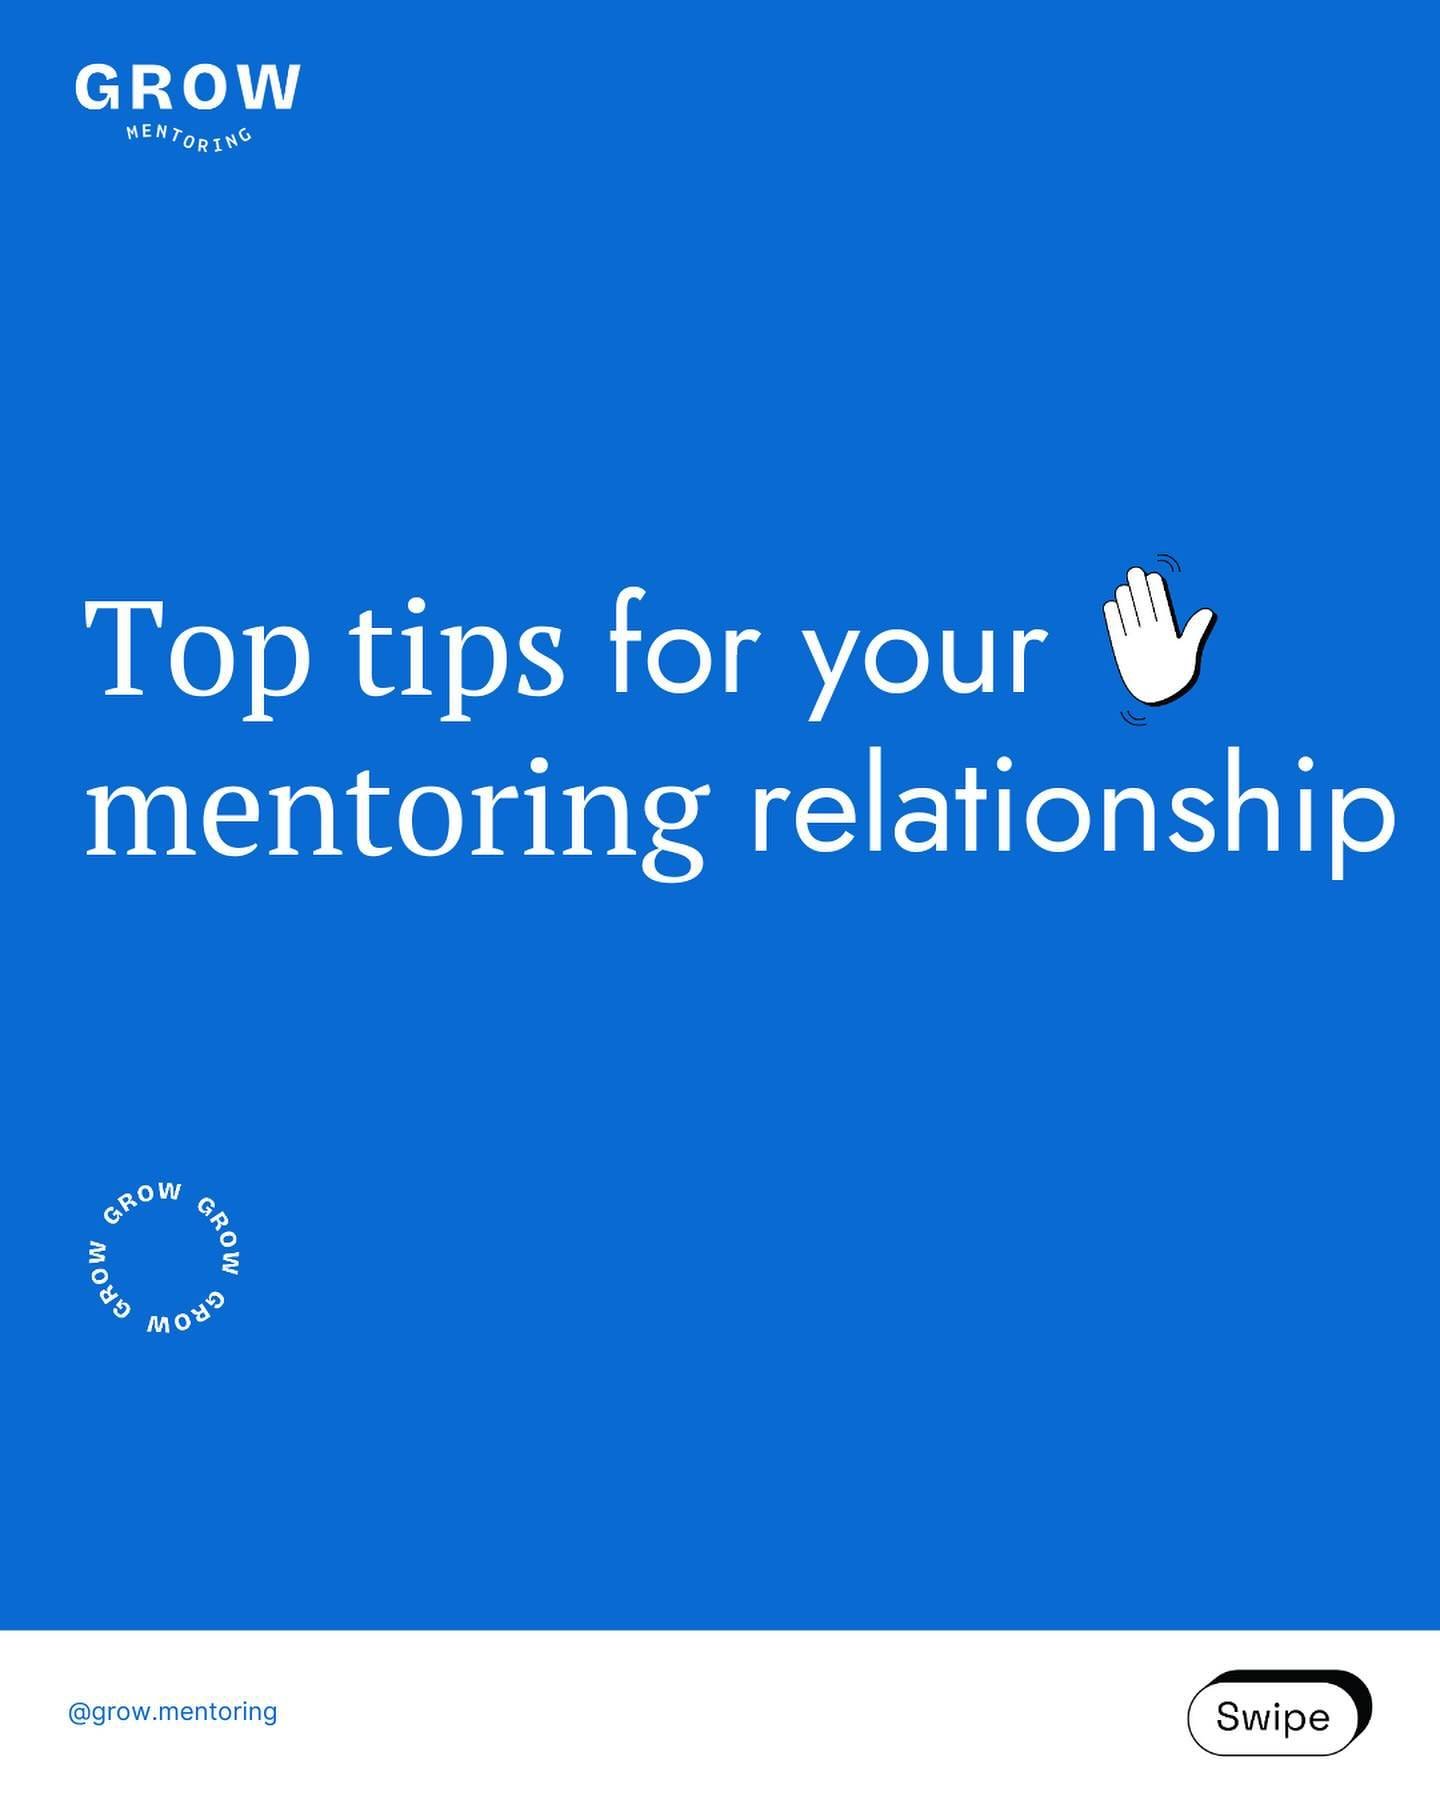 If you have recently been paired with a mentor, check out these top tips for making the most out of your mentoring relationship! As a mentee, we want to empower you to tailor the mentoring relationship to your ambitions and planned goals - swipe to f